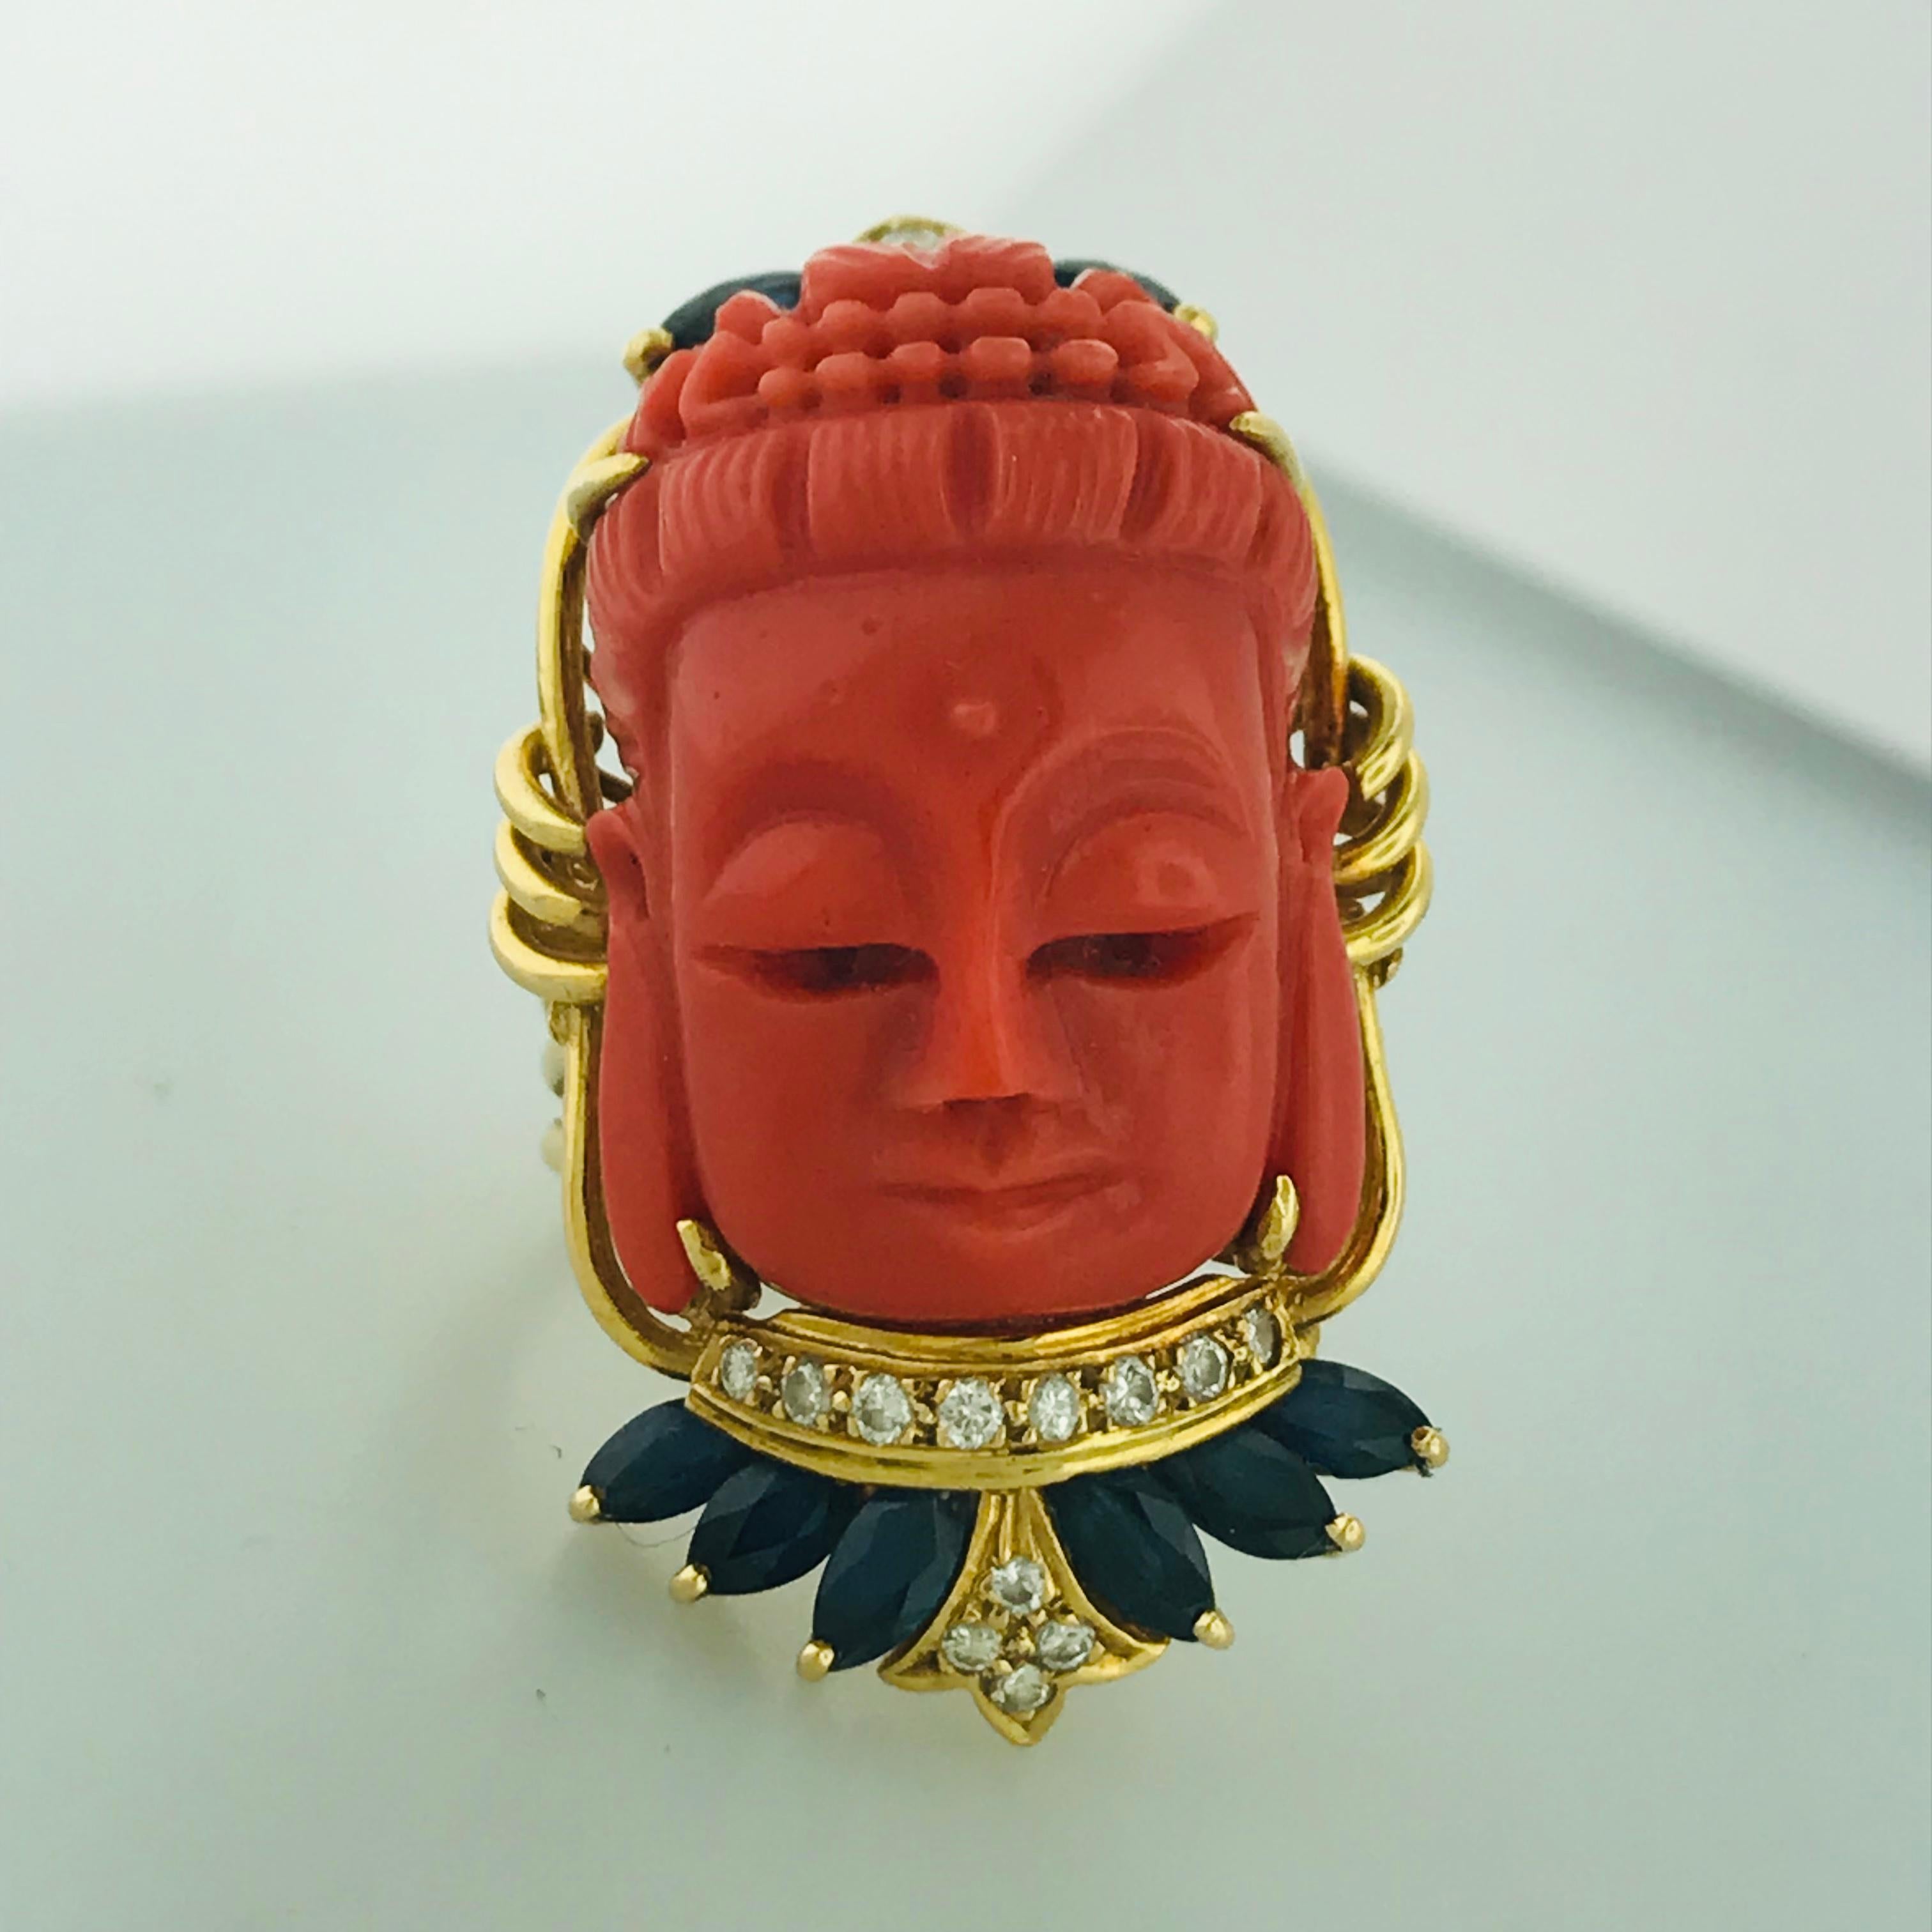 This estate buddha ring is one of a kind and very special! With a genuine carved coral piece and deep blue sapphire gemstones, accented with natural white diamonds. The rich 18kt yellow gold contrasts beautifully with the natural gemstone colors.